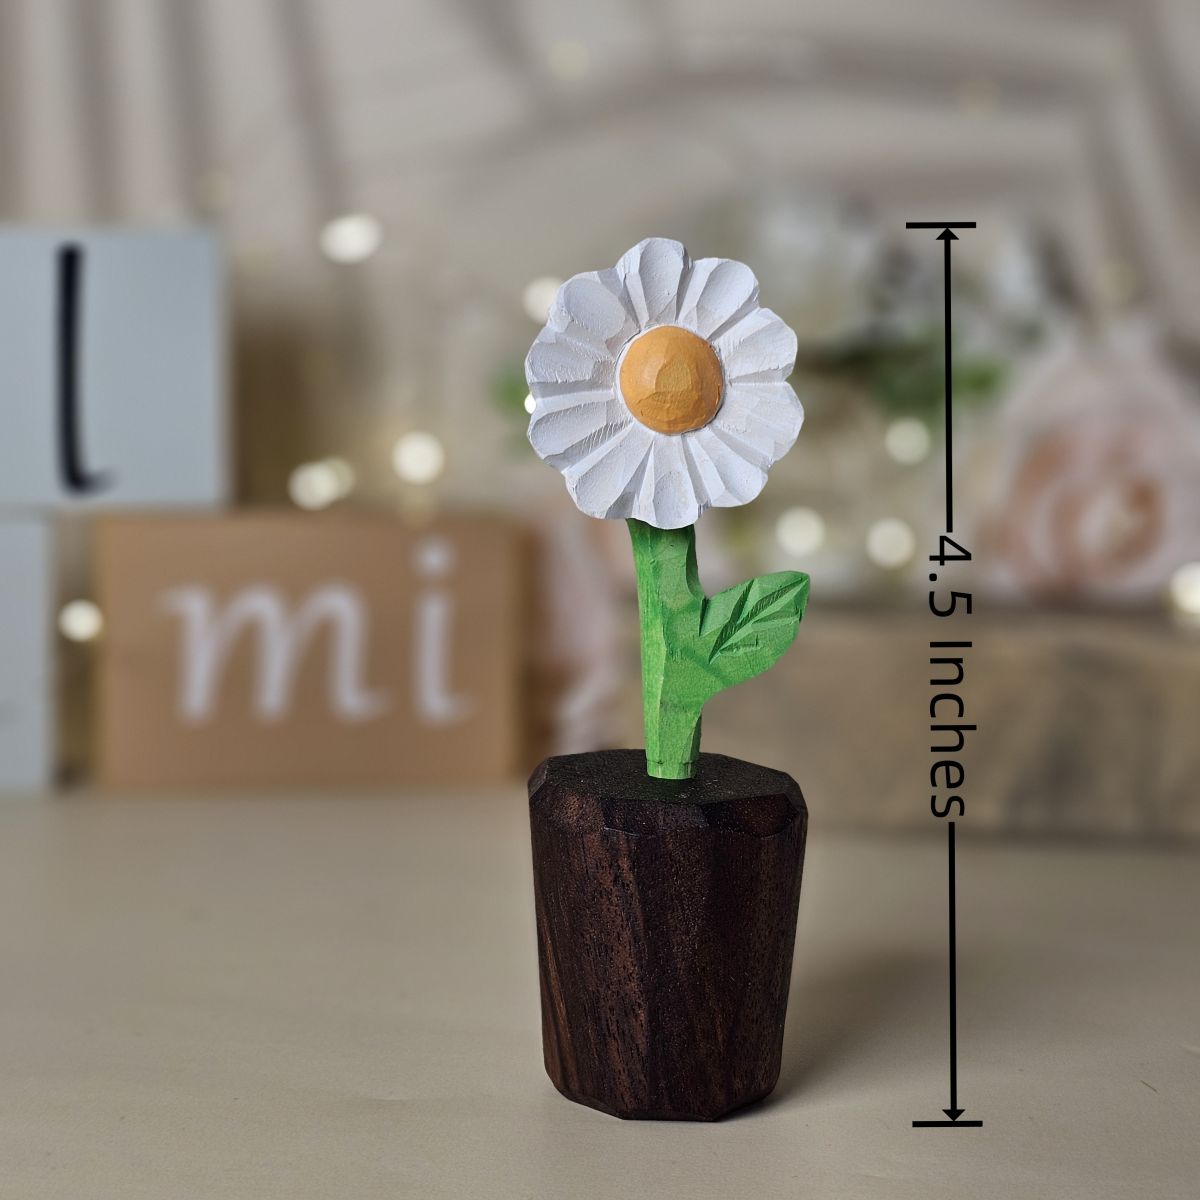 Delicate Daisy Wooden Flower Sculpture | Handcrafted & Gift-Ready - Wooden Islands